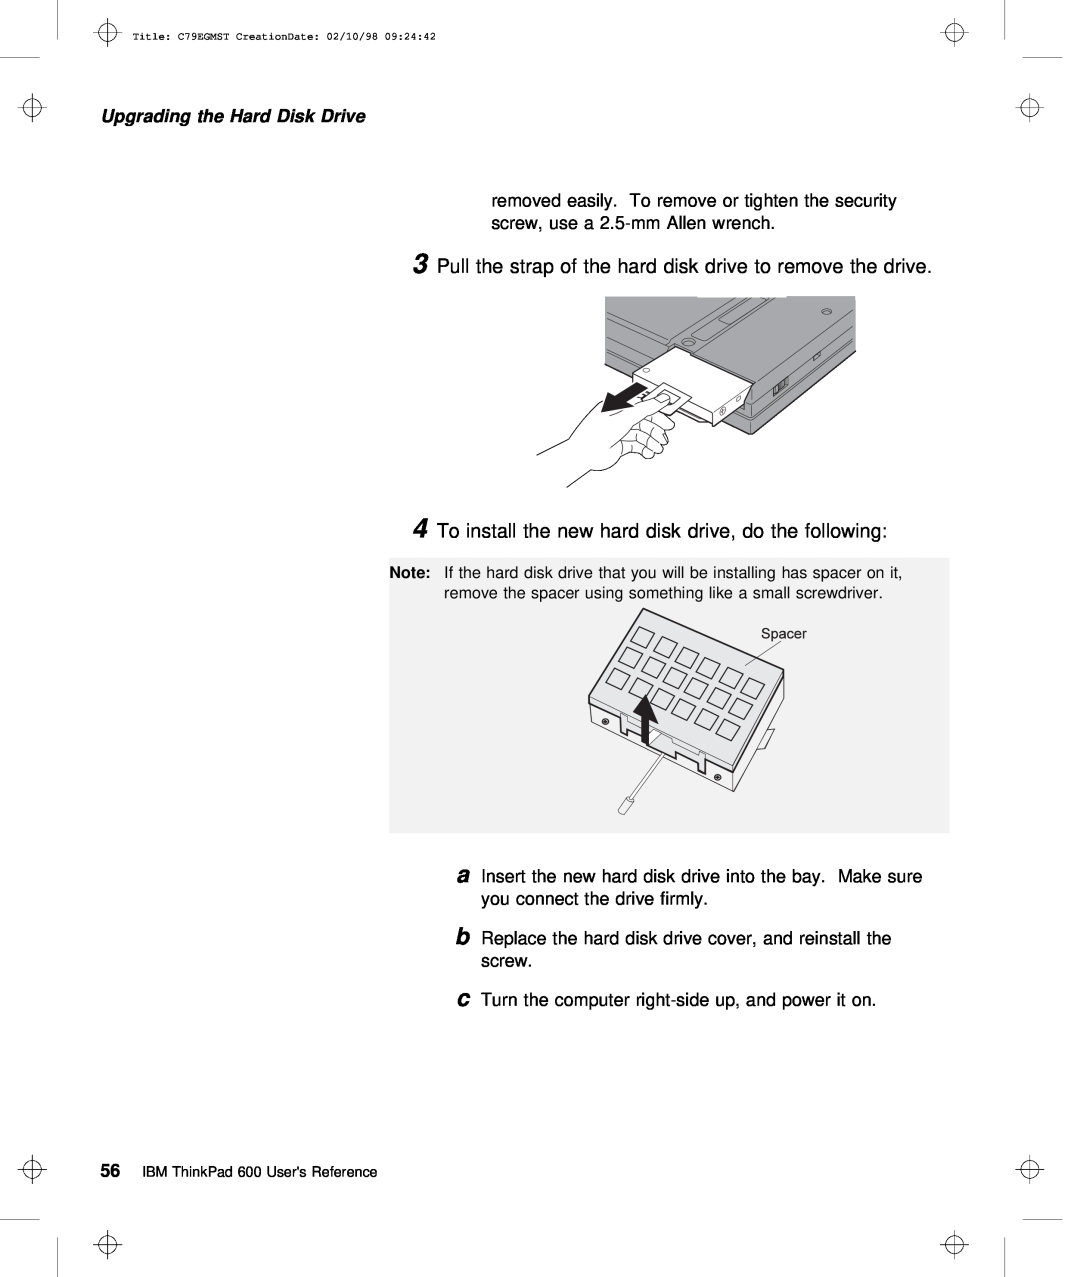 IBM C79EGMST manual Pull the strap of the hard disk drive to remove t, To install the new hard disk drive, do the following 